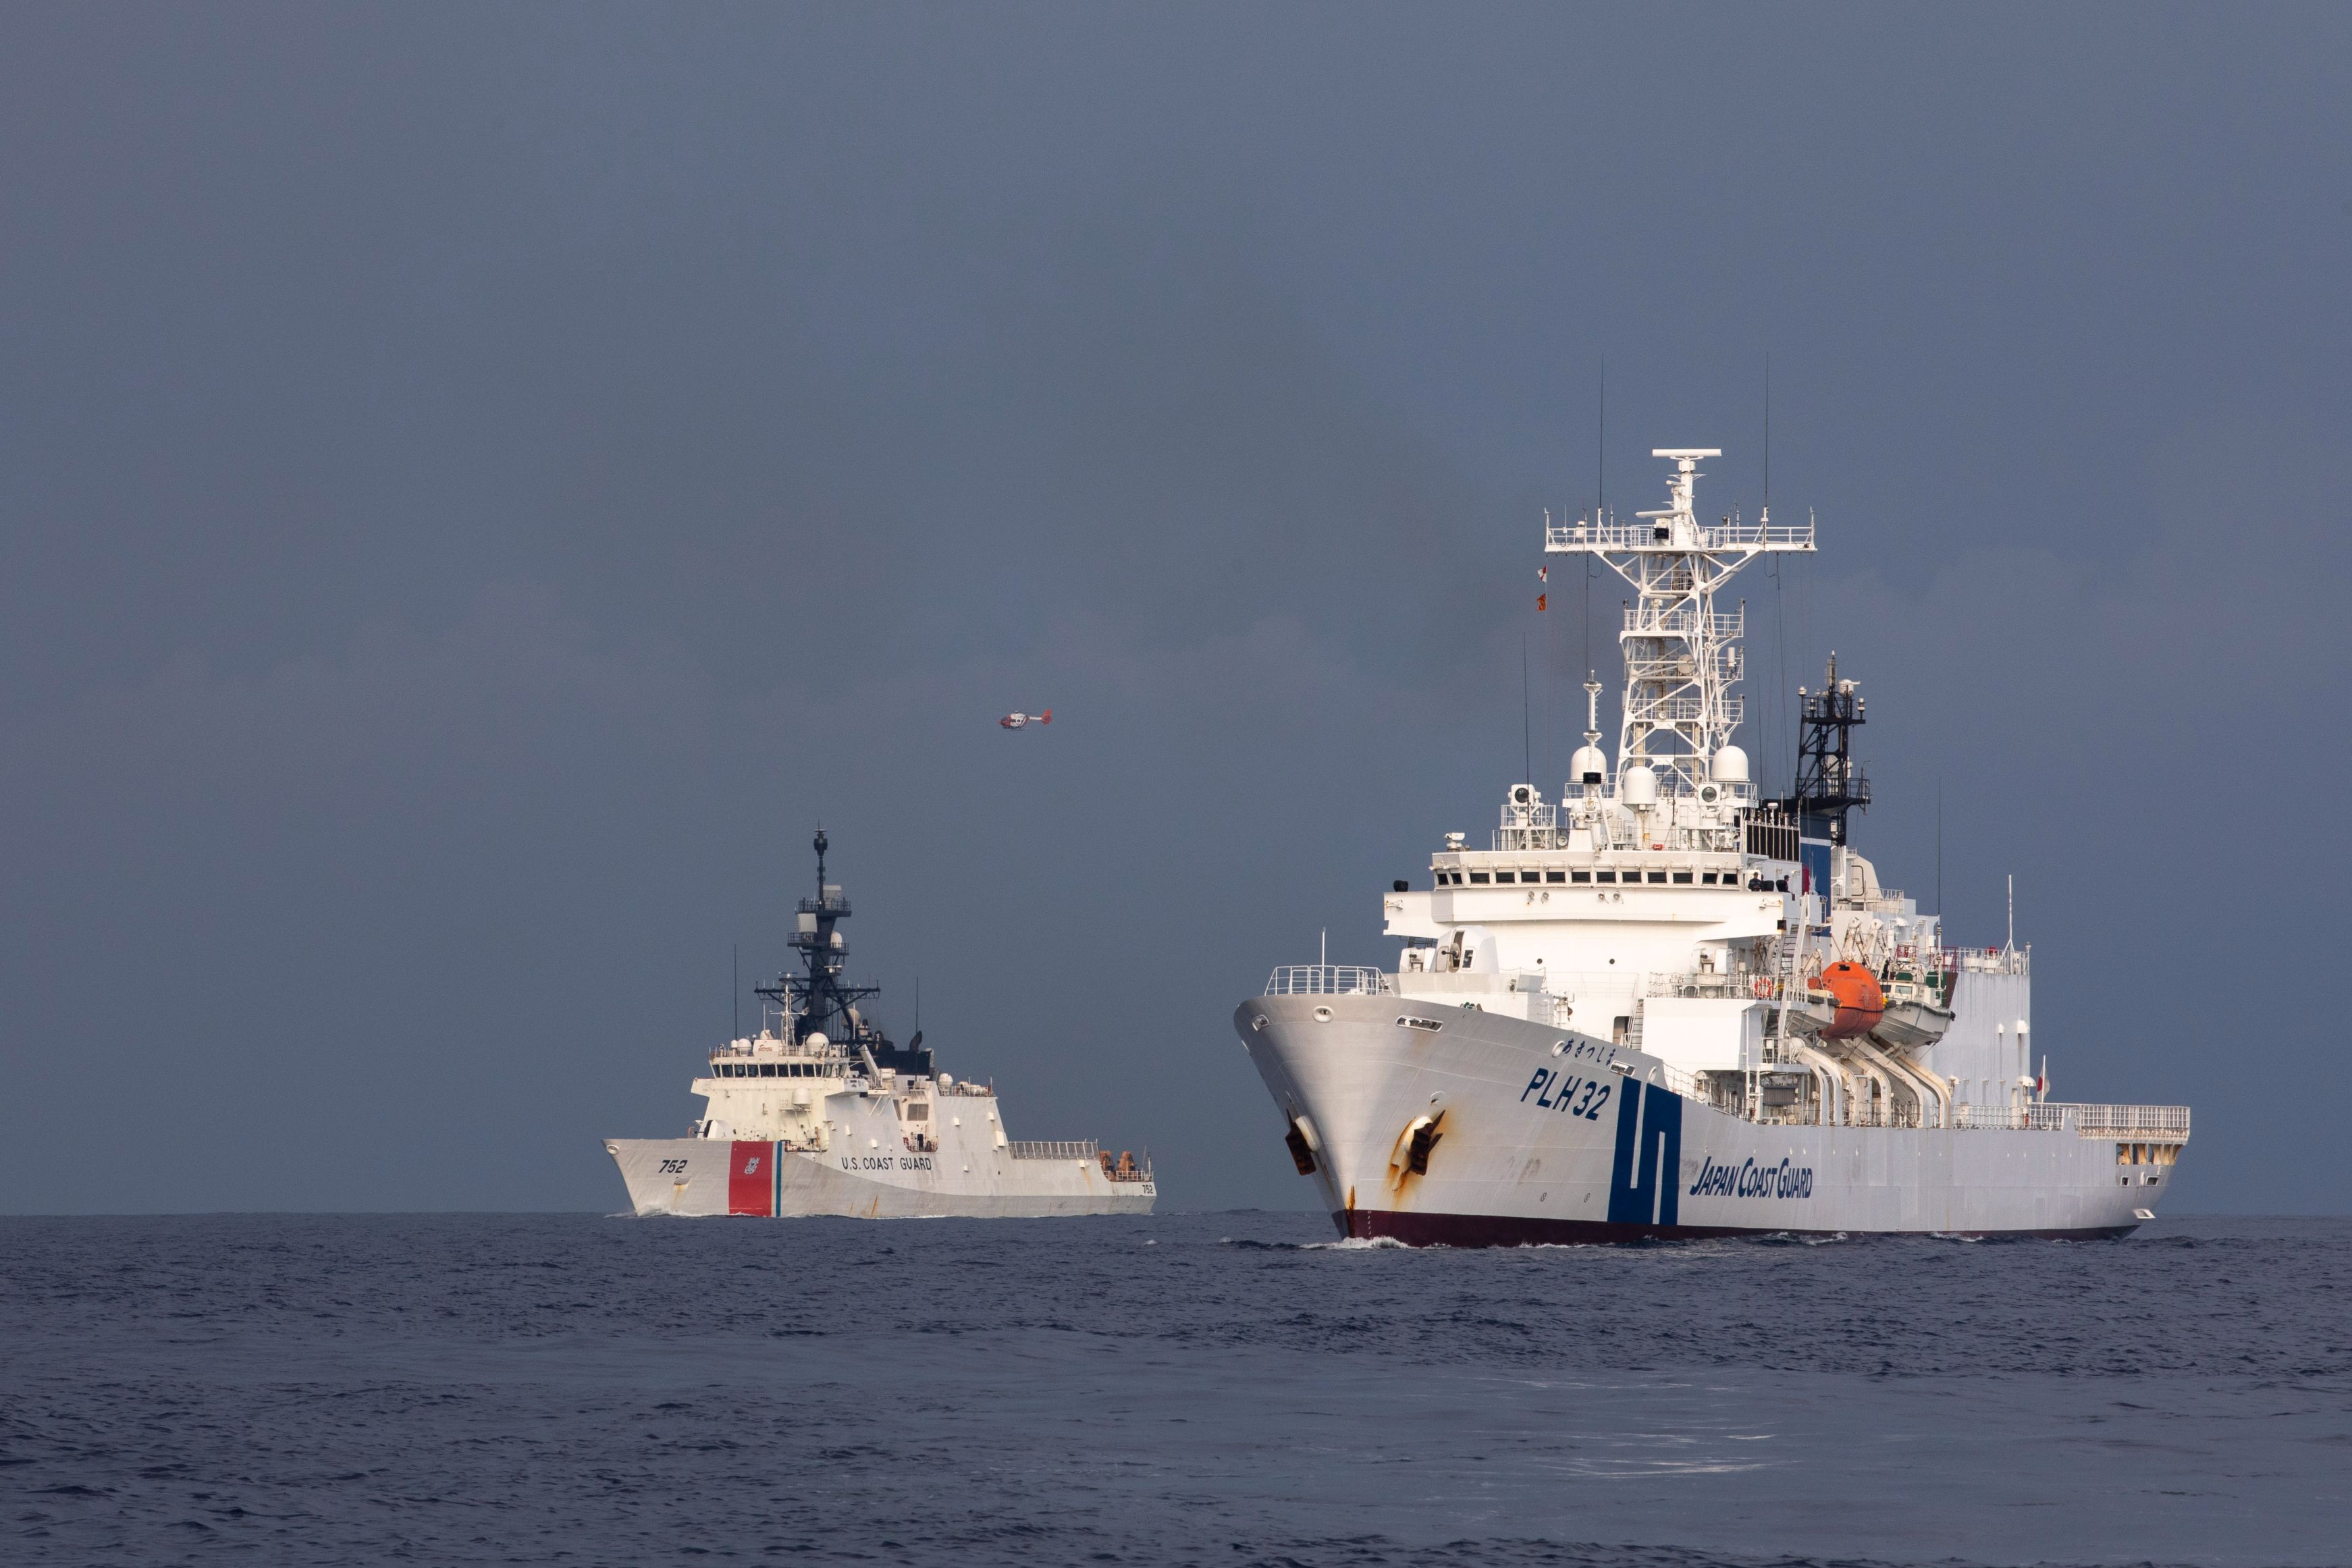 (From right) Japan Coast Guard Vessel Akitsushima (PLH 32) and U.S. Coast Guard Cutter Stratton (WMSL 752) conduct a trilateral engagement with the Philippine Coast Guard in the South China Sea